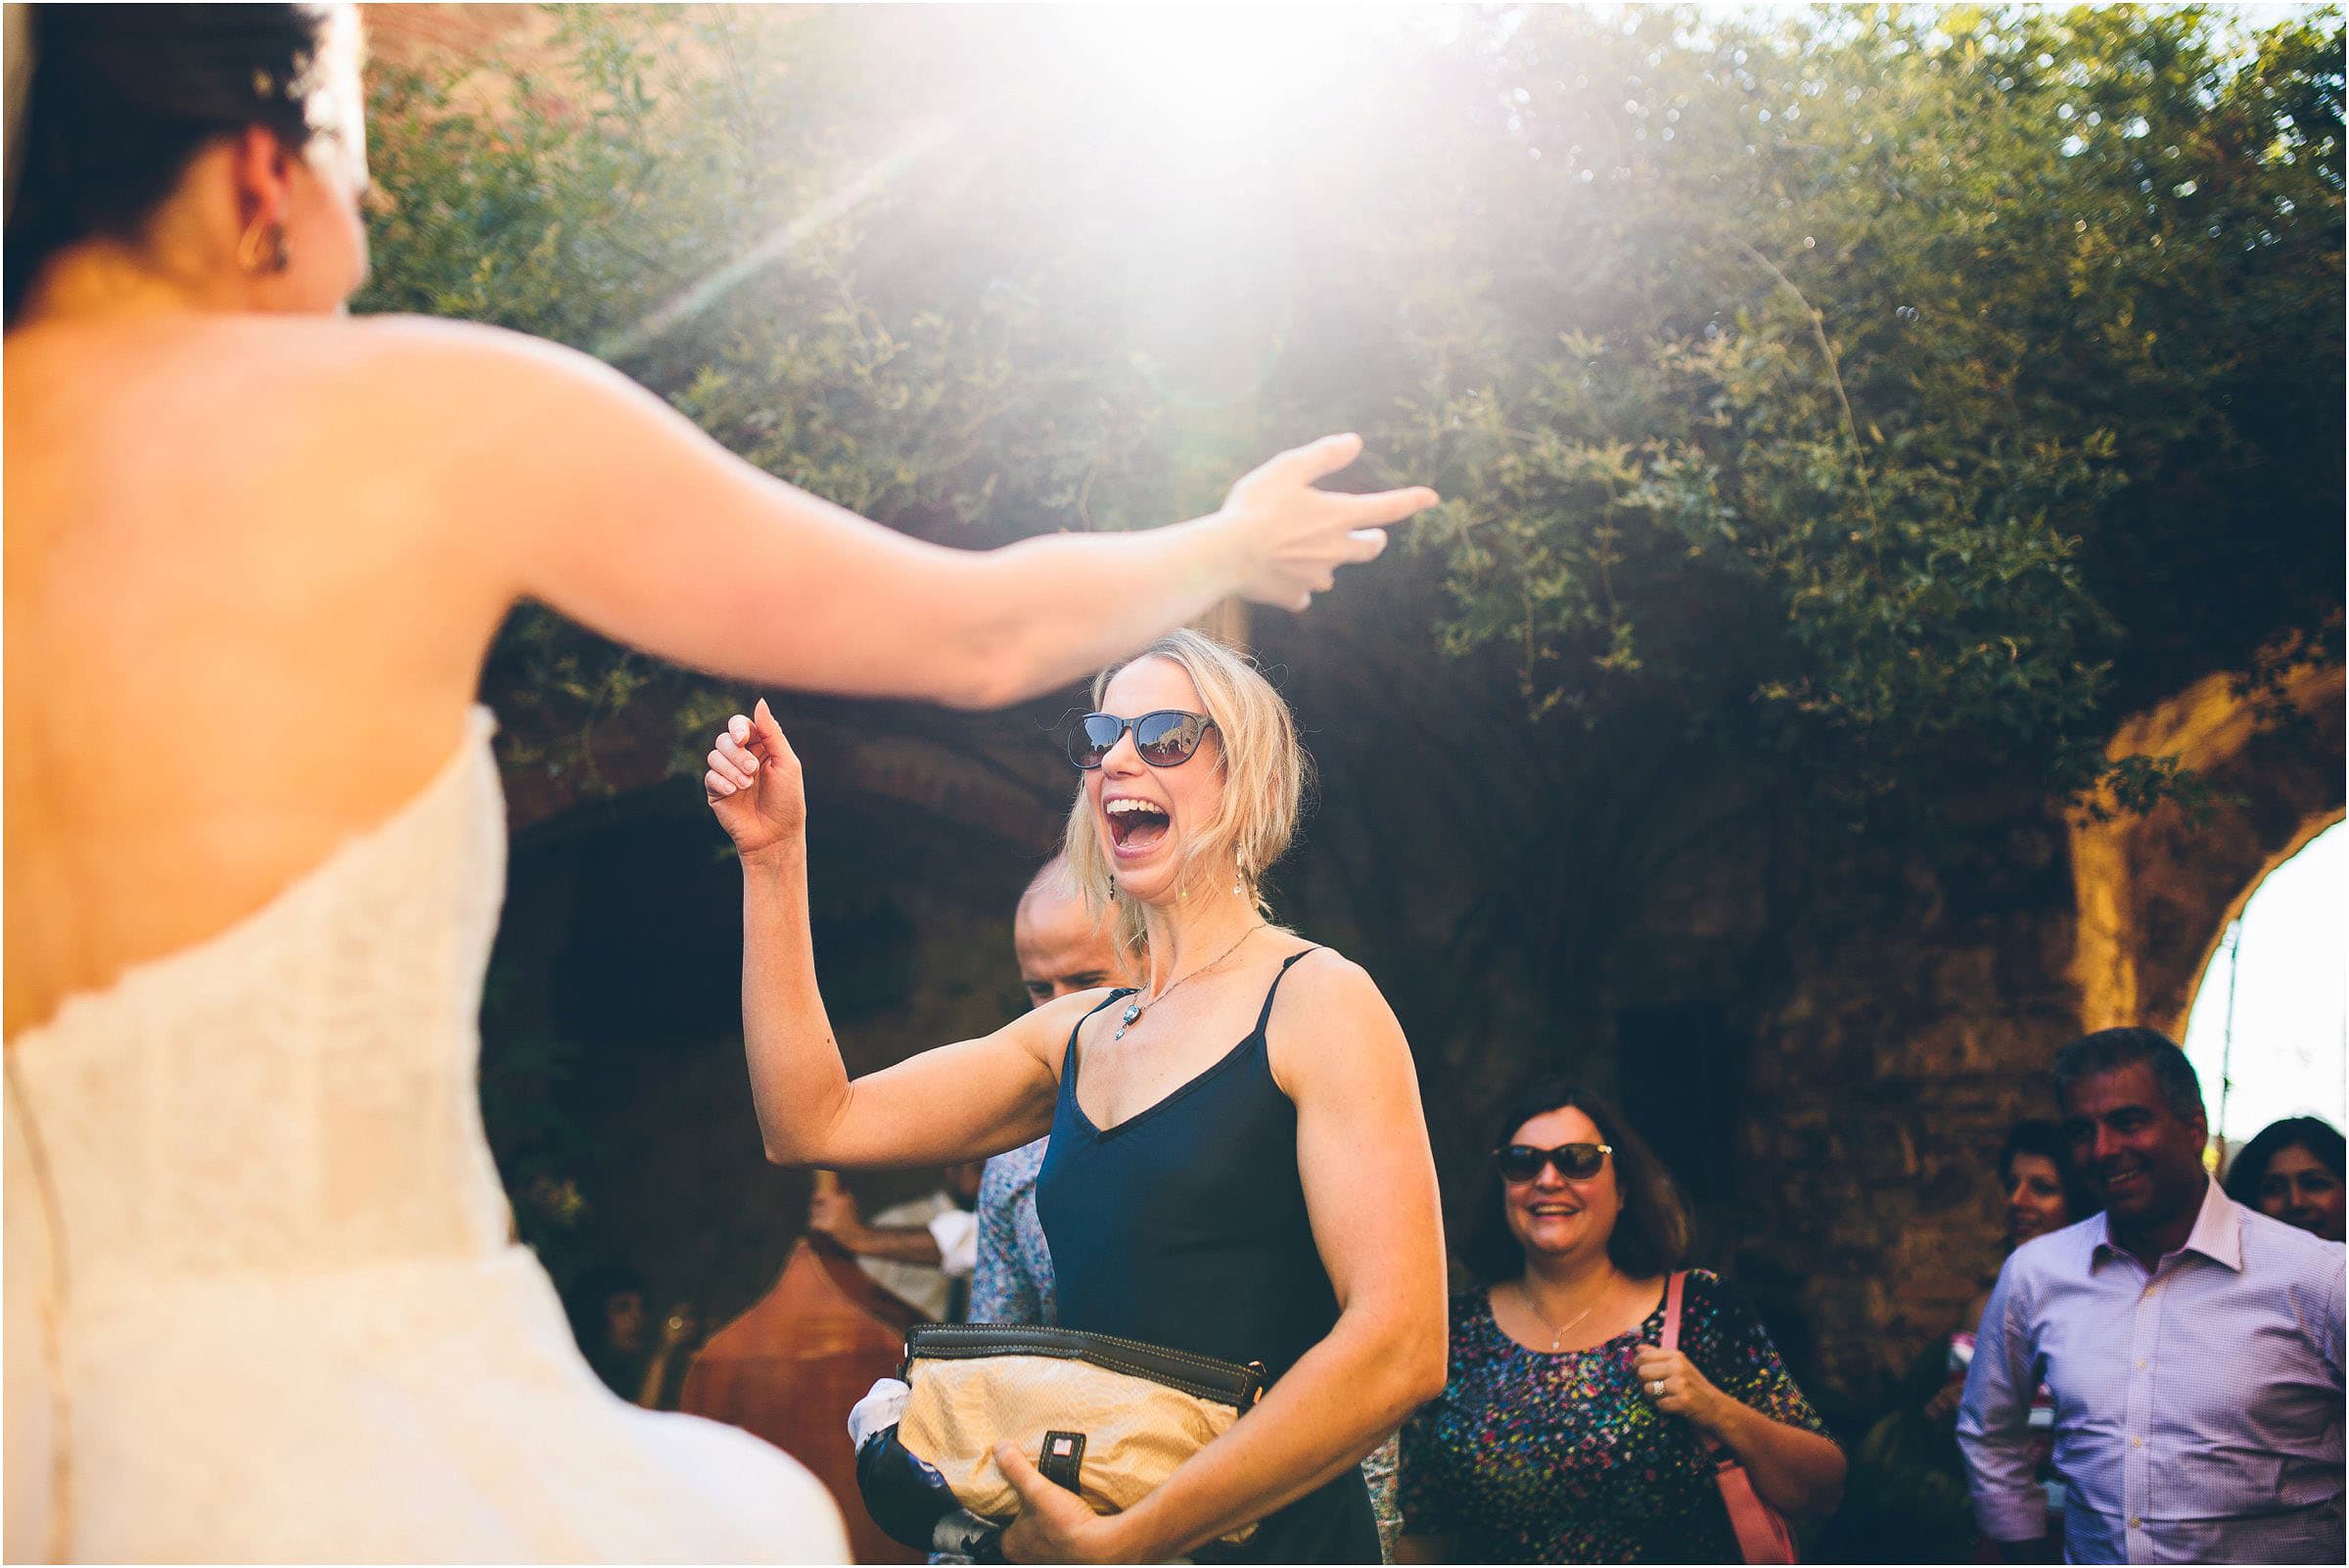 A wedding guest in a black dress and sunglasses arrives at Castello di Vicarello in Tuscany to greet the bride